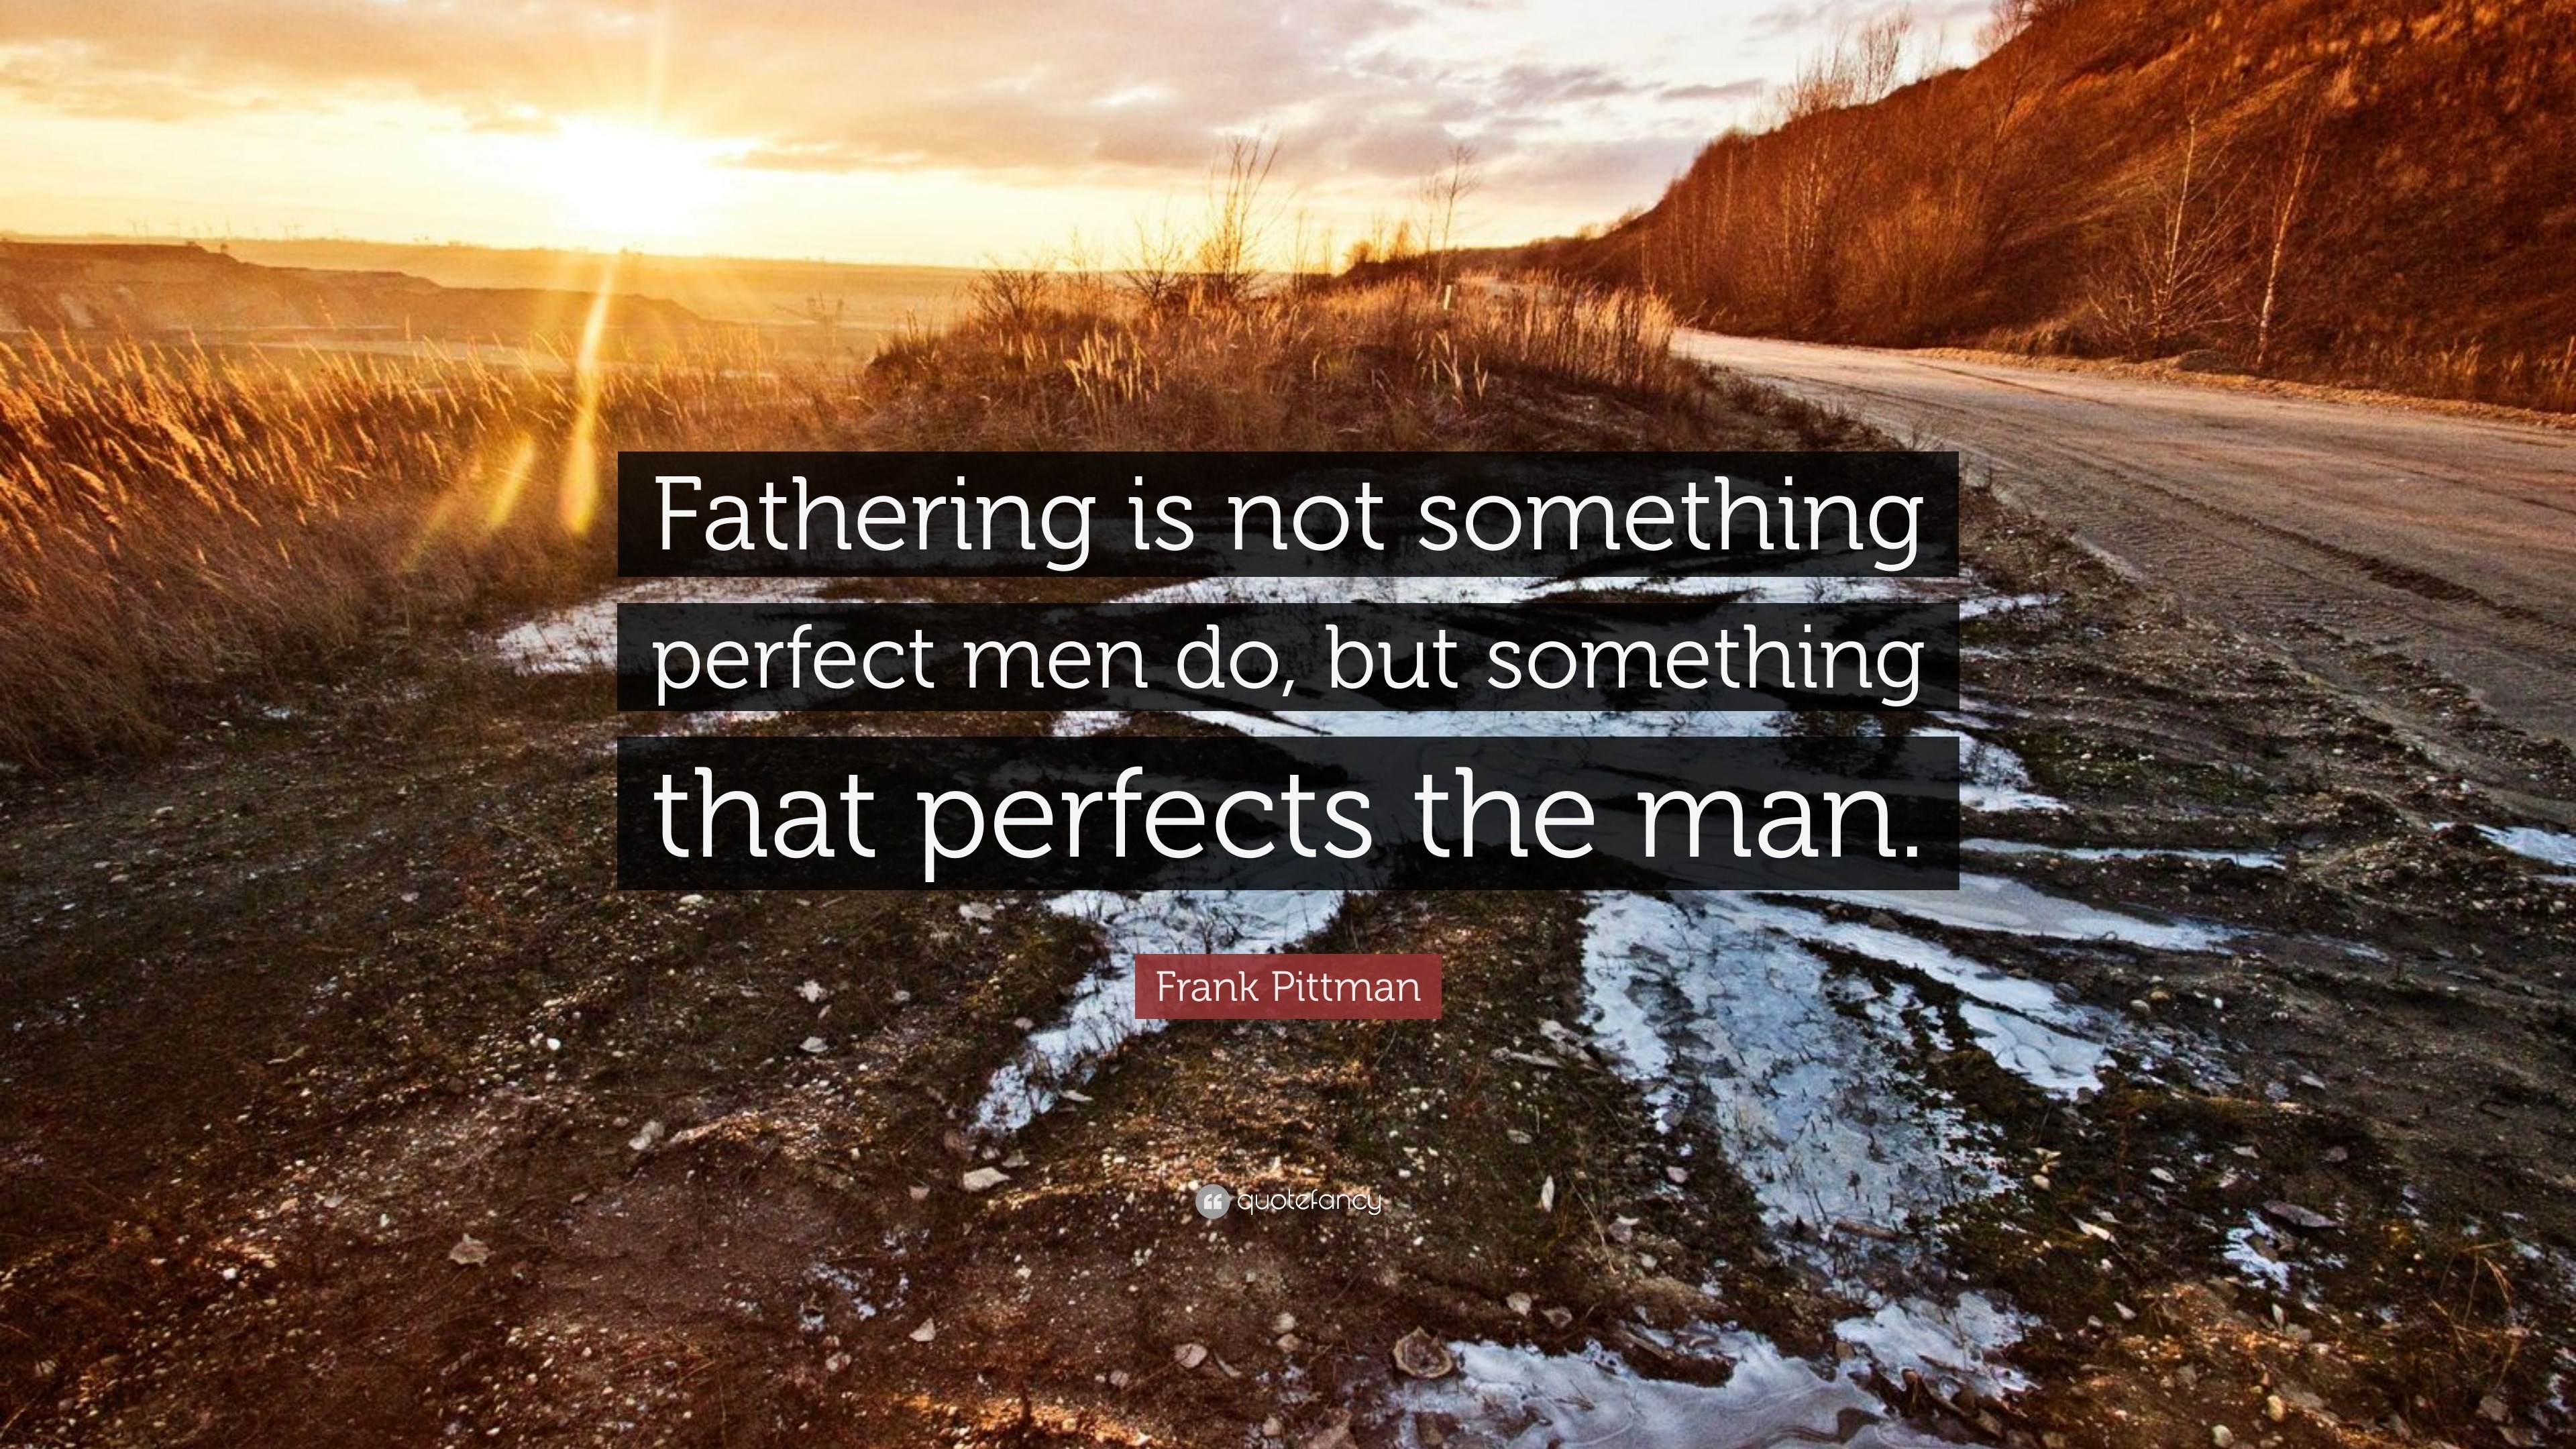 Frank Pittman Quote “Fathering is not something perfect men do but something that